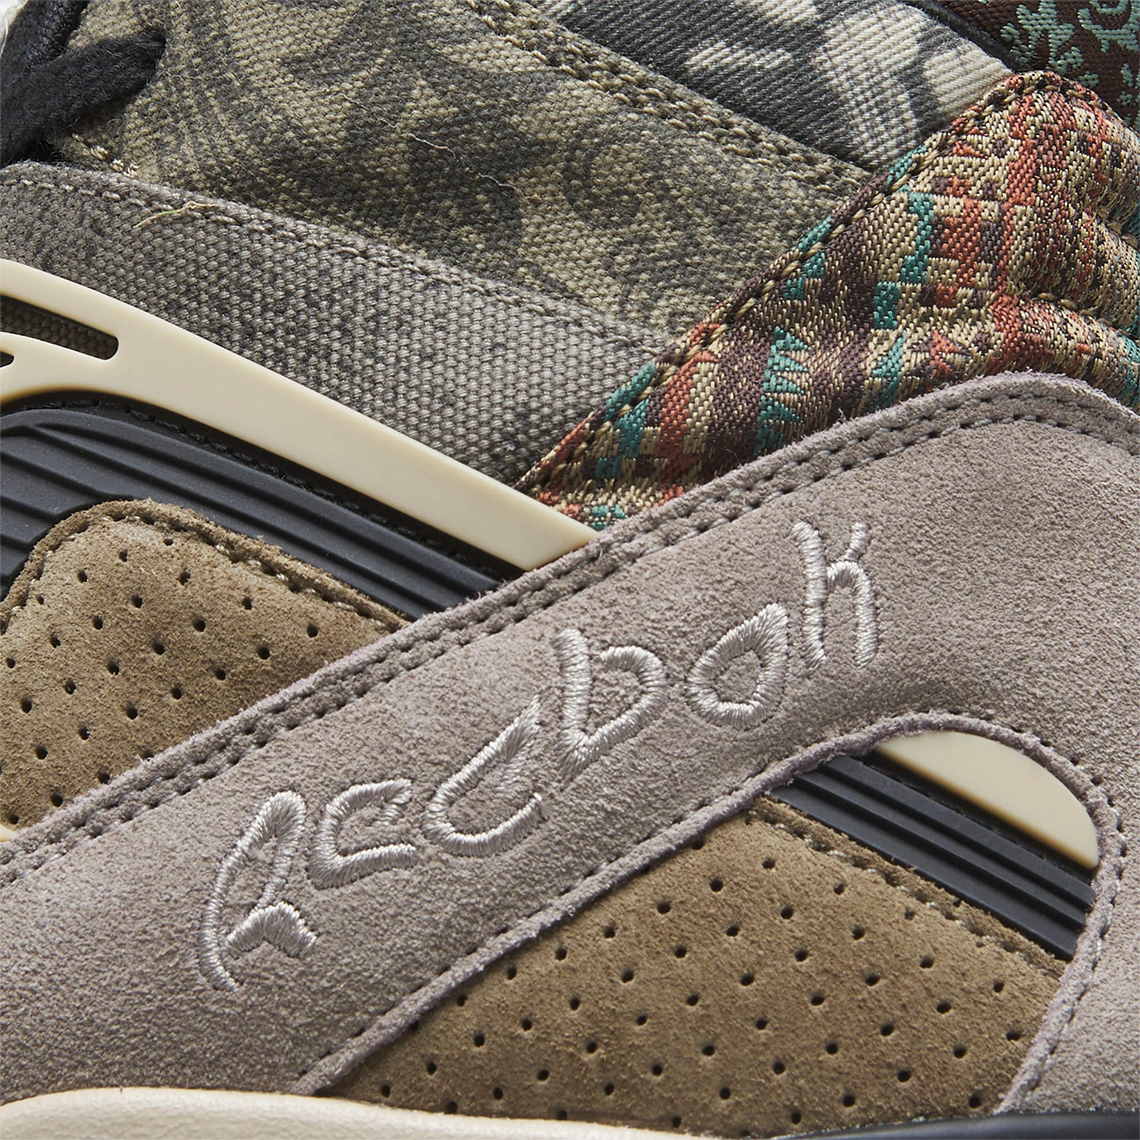 Reebok has been cranking out dope versions of the Classic Leather see GW3800 420 Ie4105 6